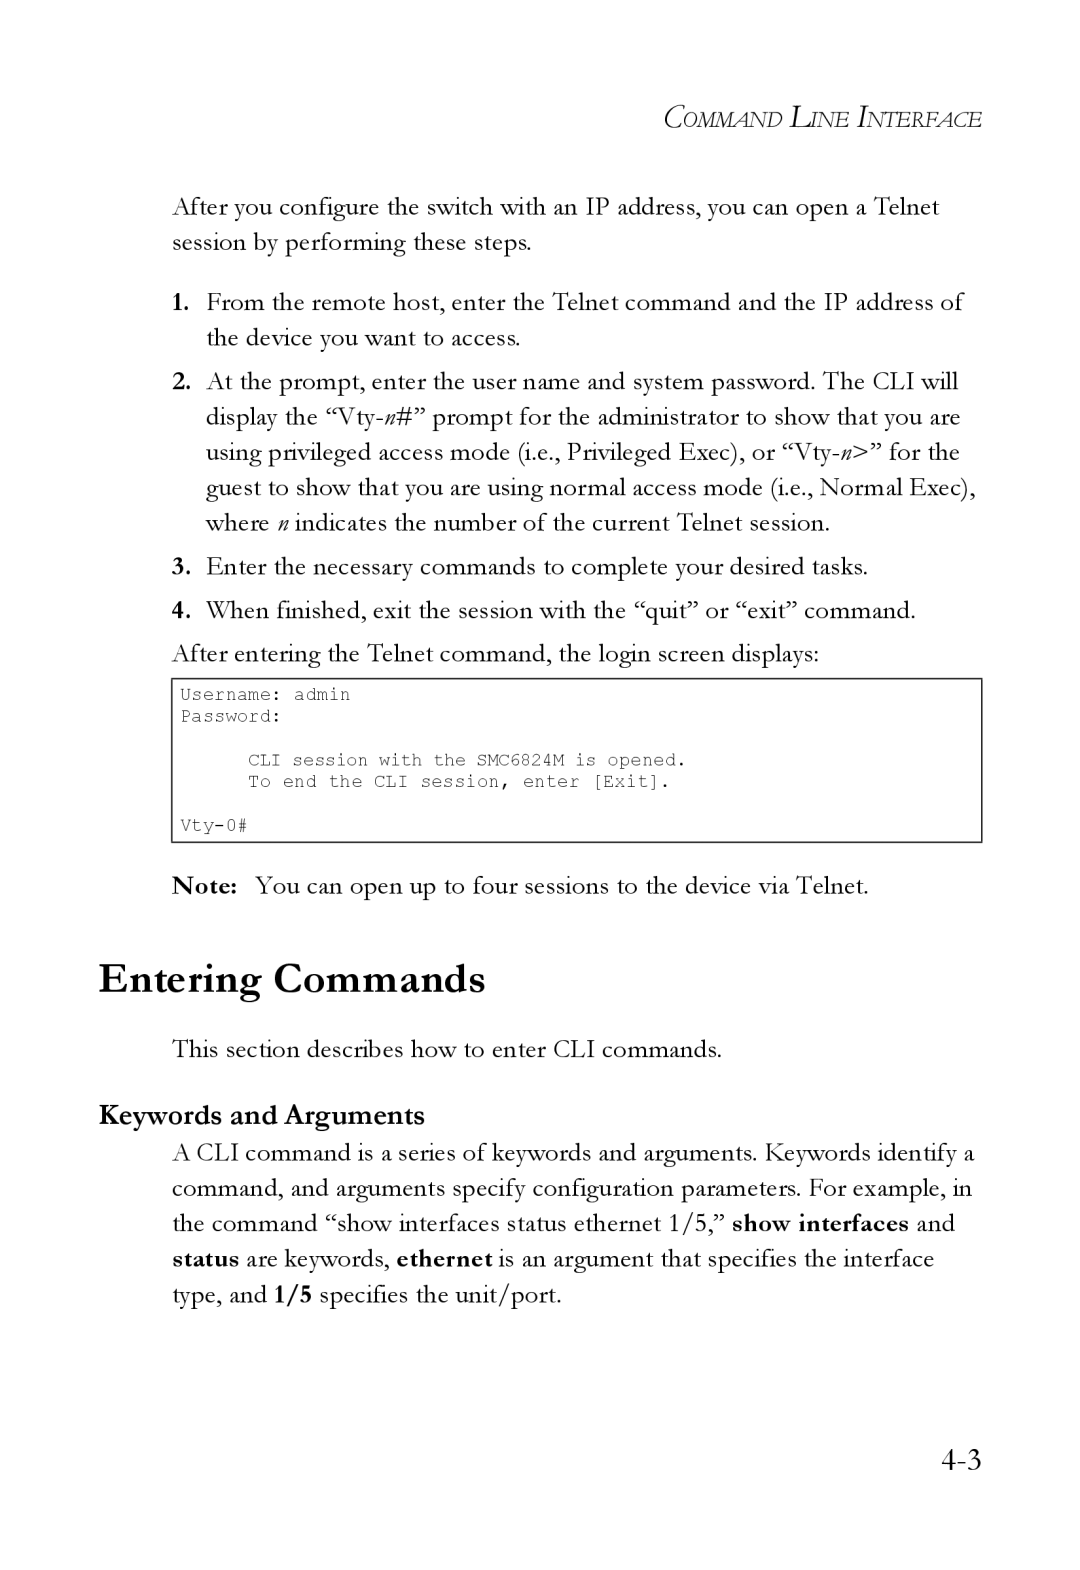 SMC Networks SMC6824M manual Entering Commands, Keywords and Arguments, This section describes how to enter CLI commands 